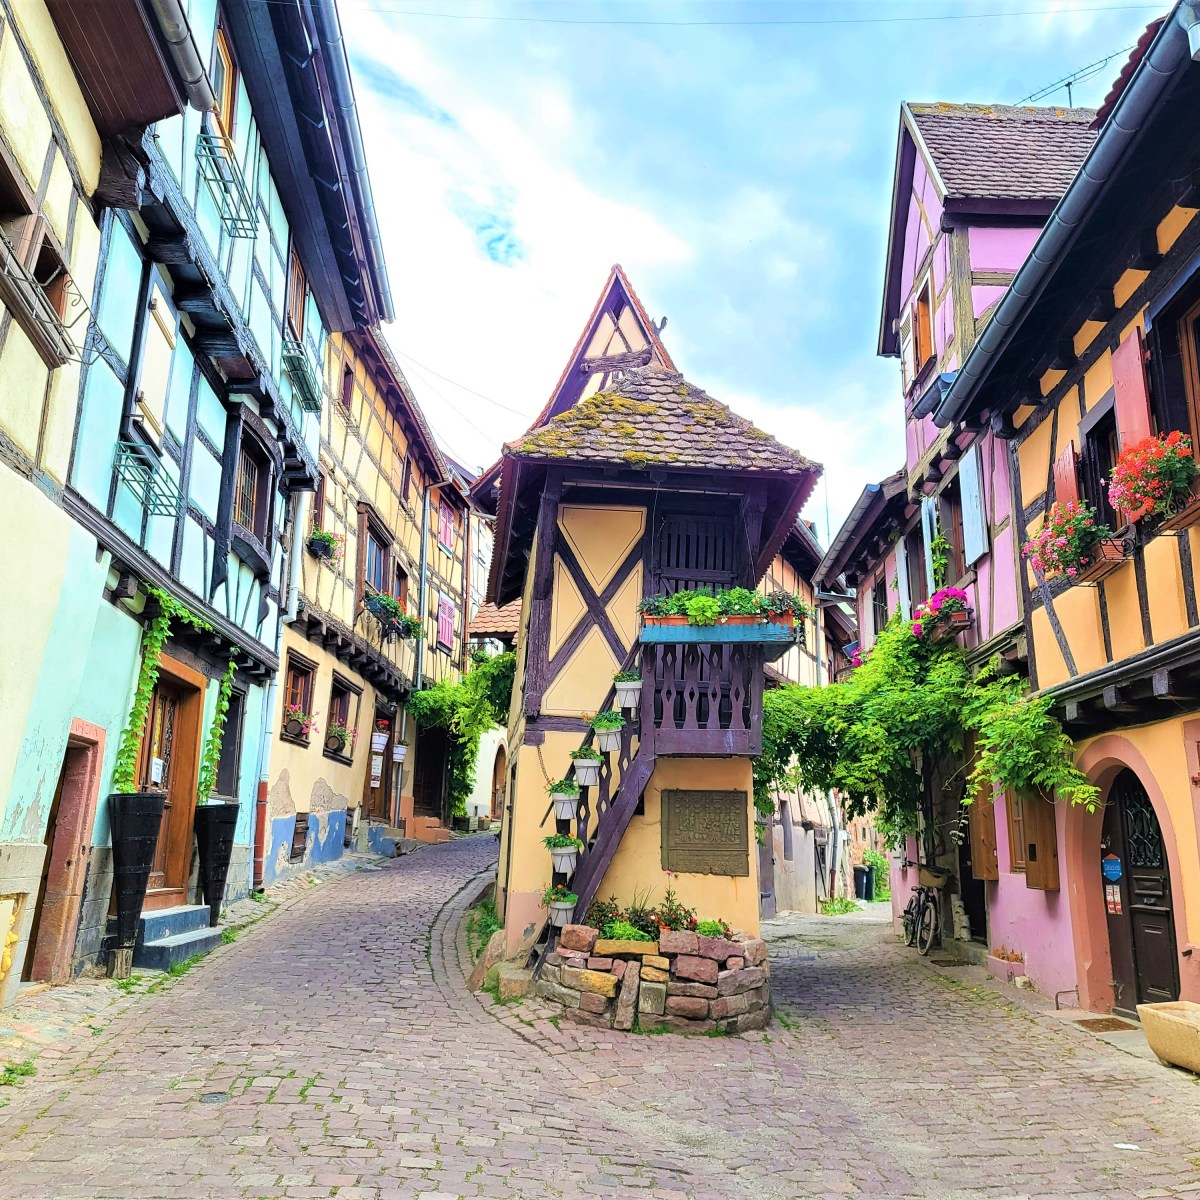 8 Best Fairytale Towns and Villages on the Alsace Wine Route, France